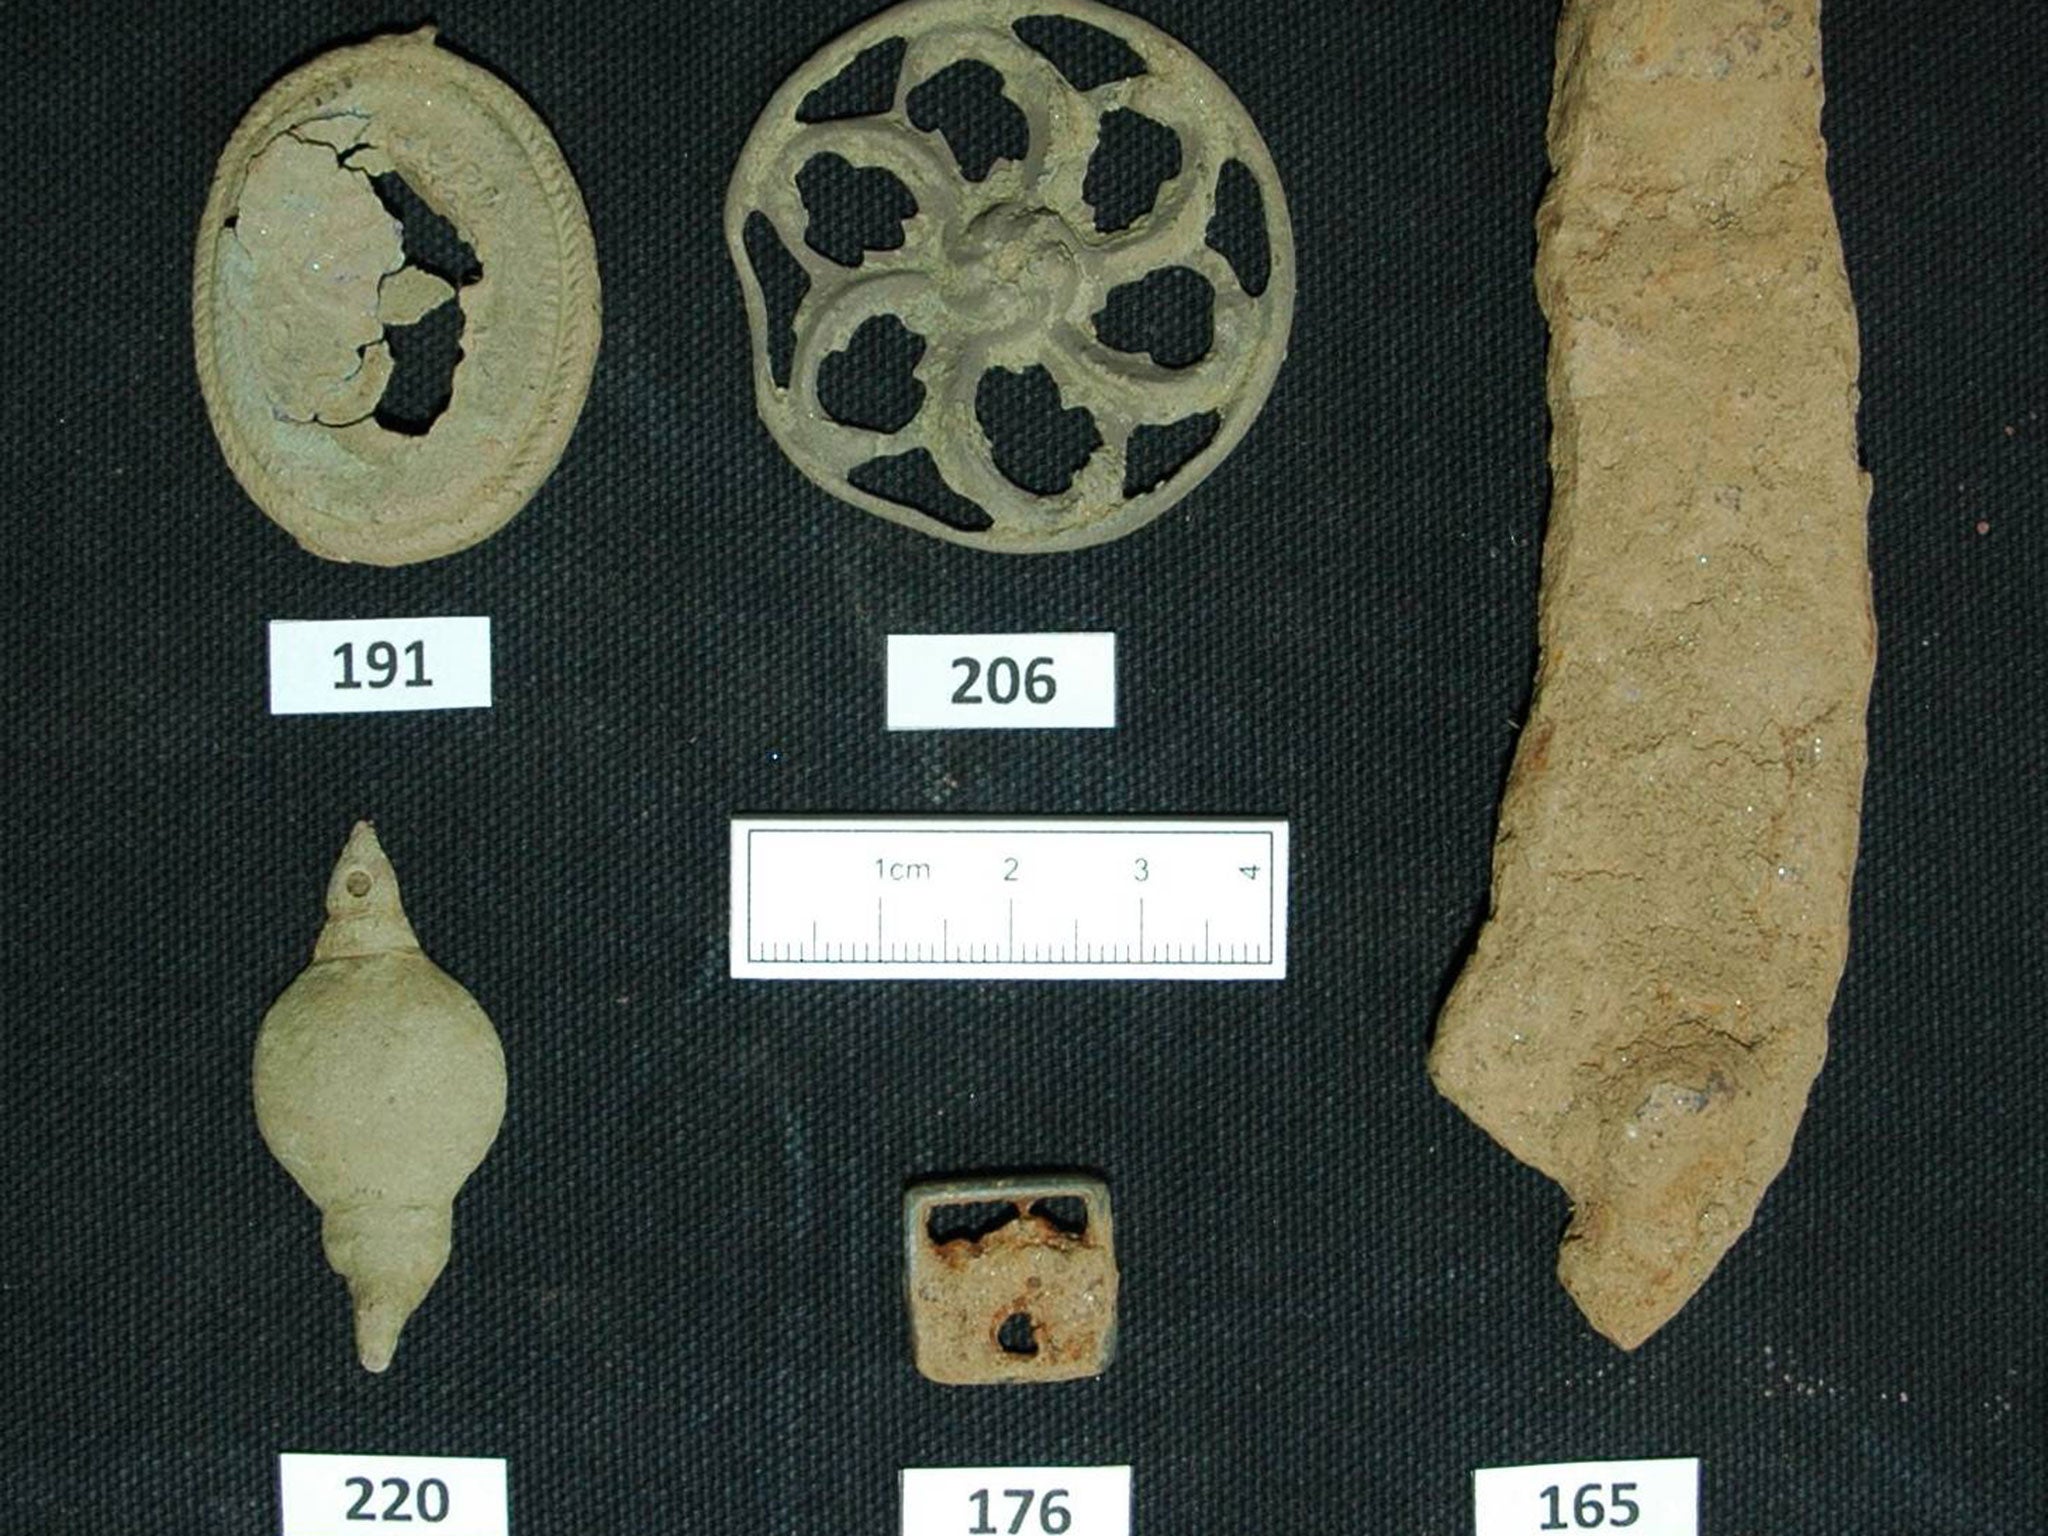 Some of the recovered artefacts